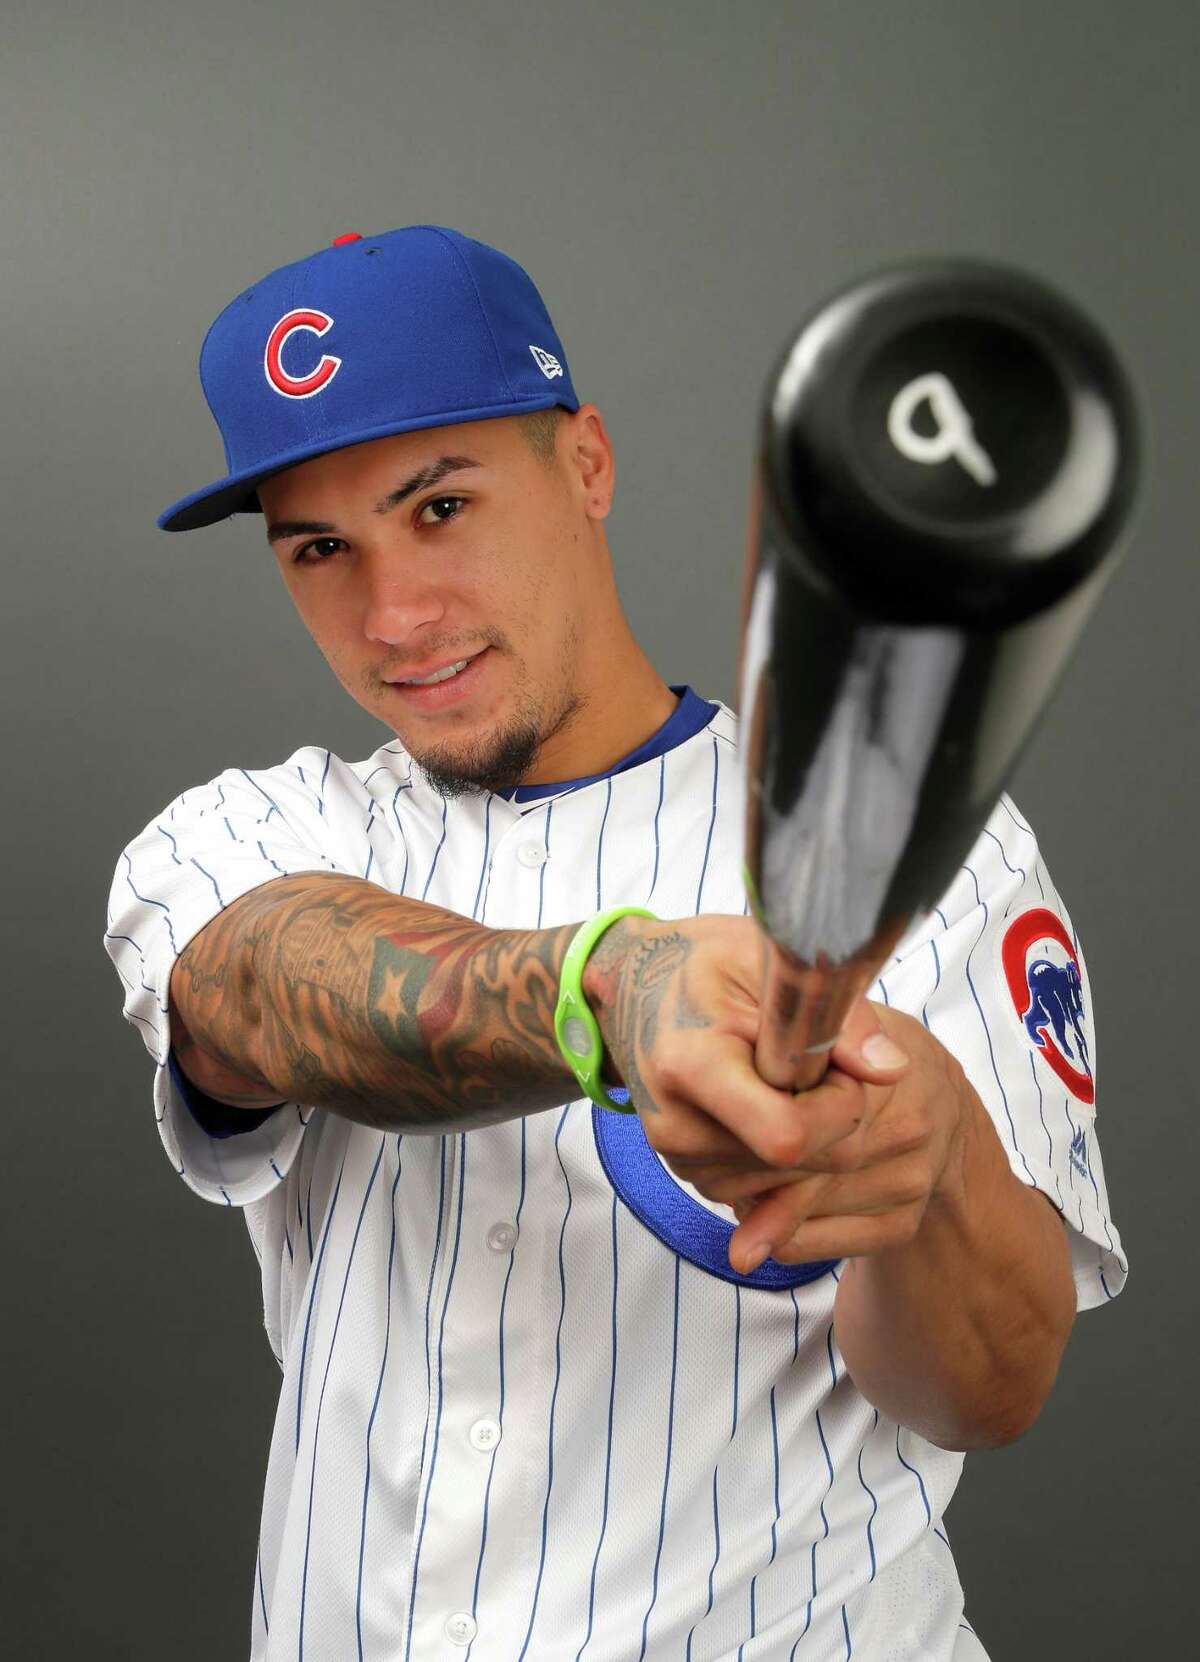 MESA, AZ - FEBRUARY 21: Javier Baez #9 of the Chicago Cubs poses during Chicago Cubs Photo Day on February 21, 2017 in Mesa, Arizona.